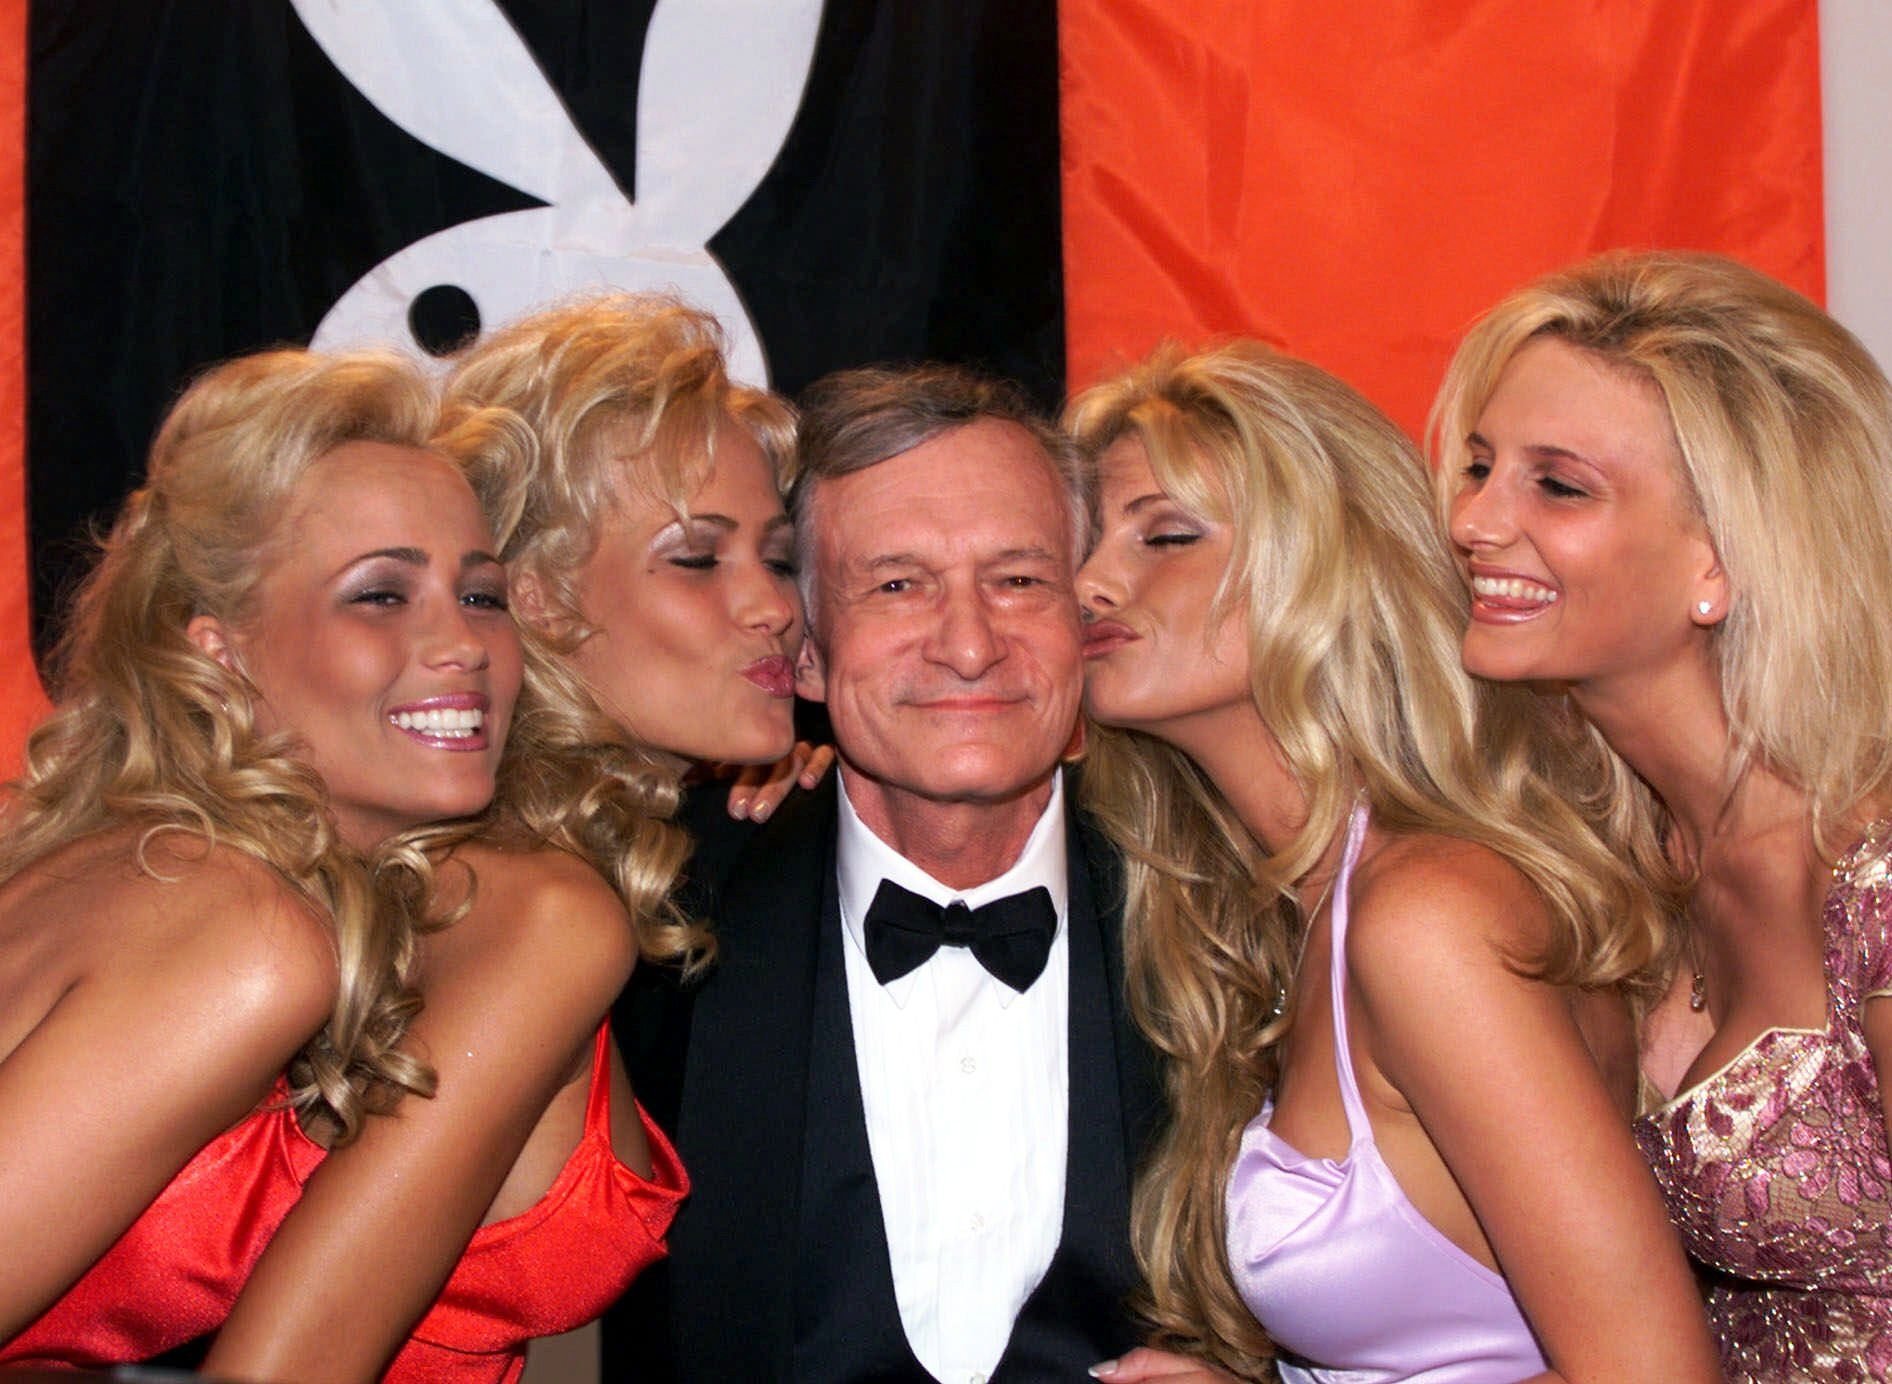 Strange Facts Hugh Hefner Wouldn’t Want Us To Know